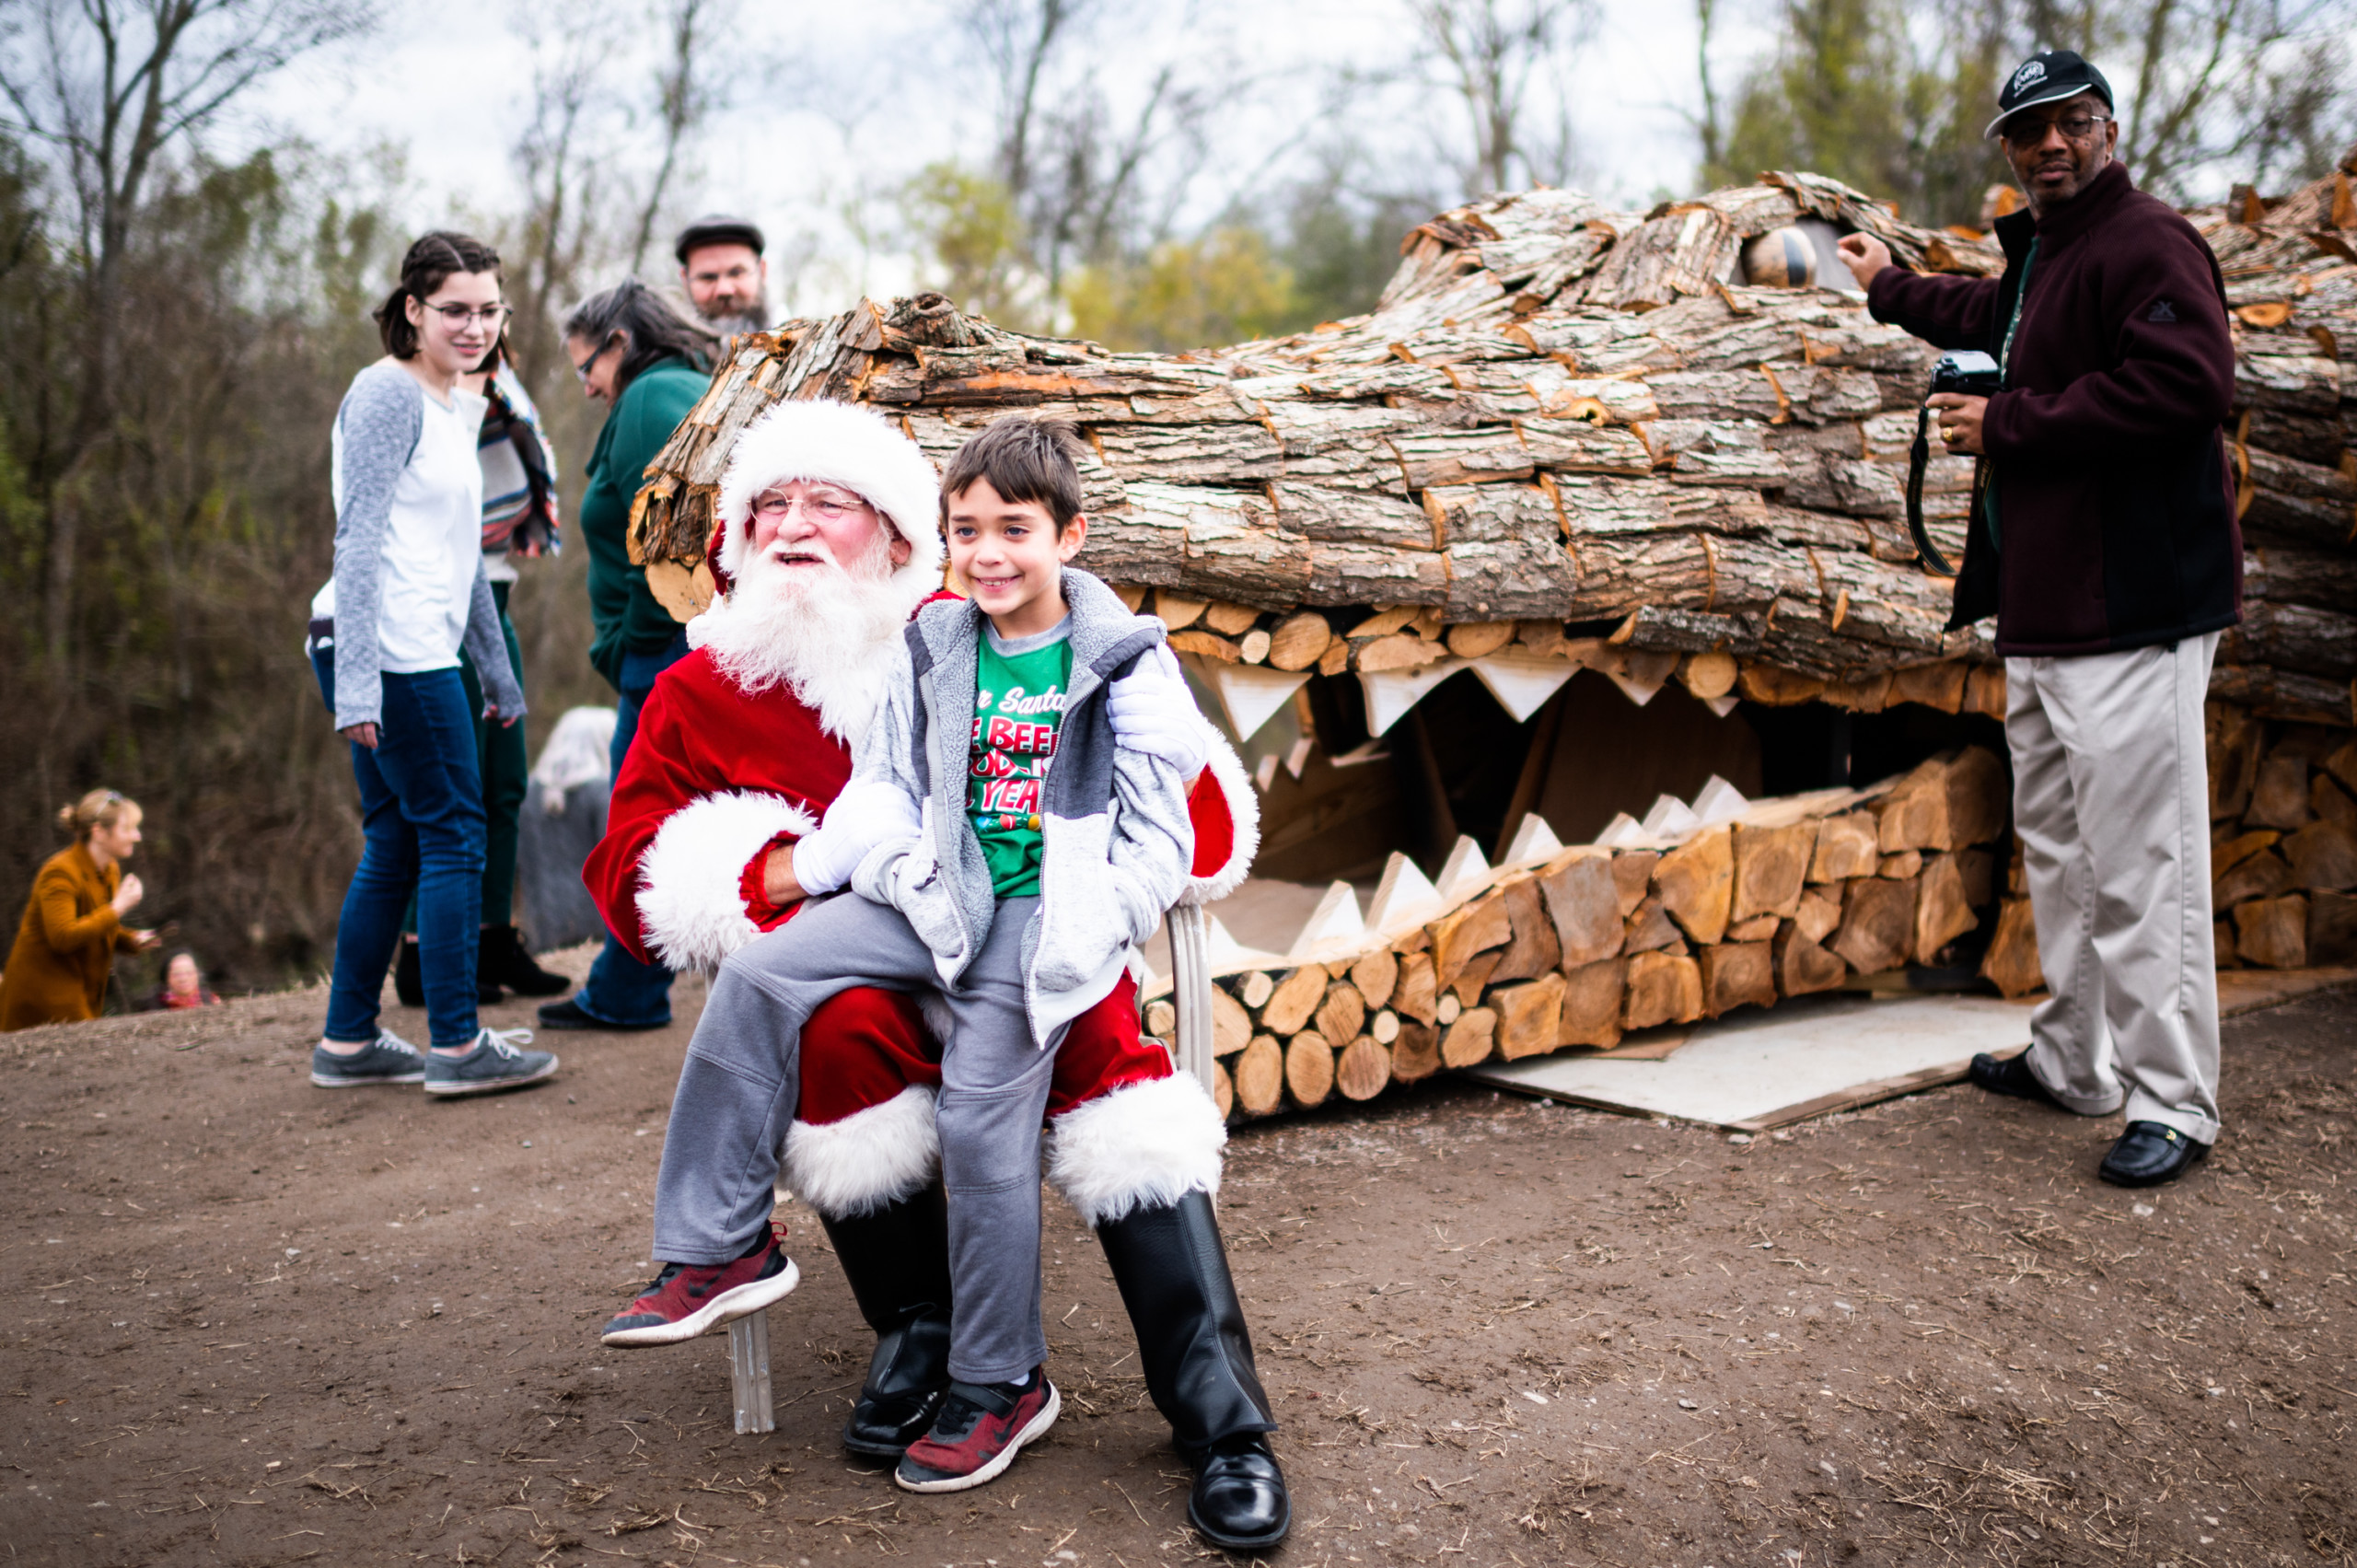 A child poses with Santa in front a 78-foot alligator bonfire sculpture